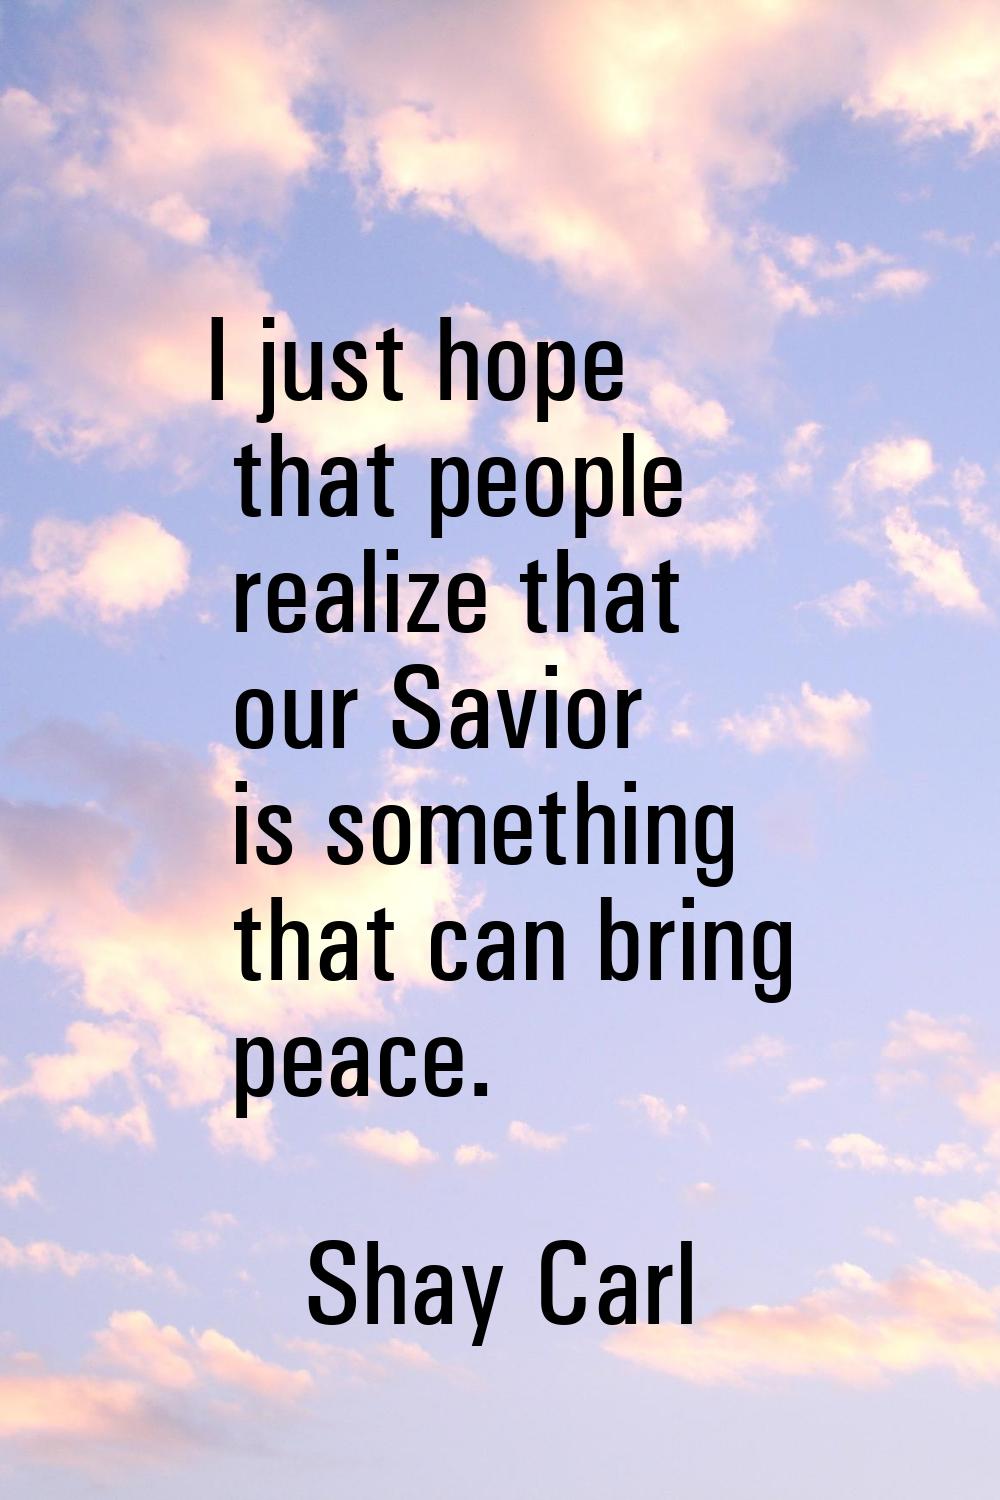 I just hope that people realize that our Savior is something that can bring peace.